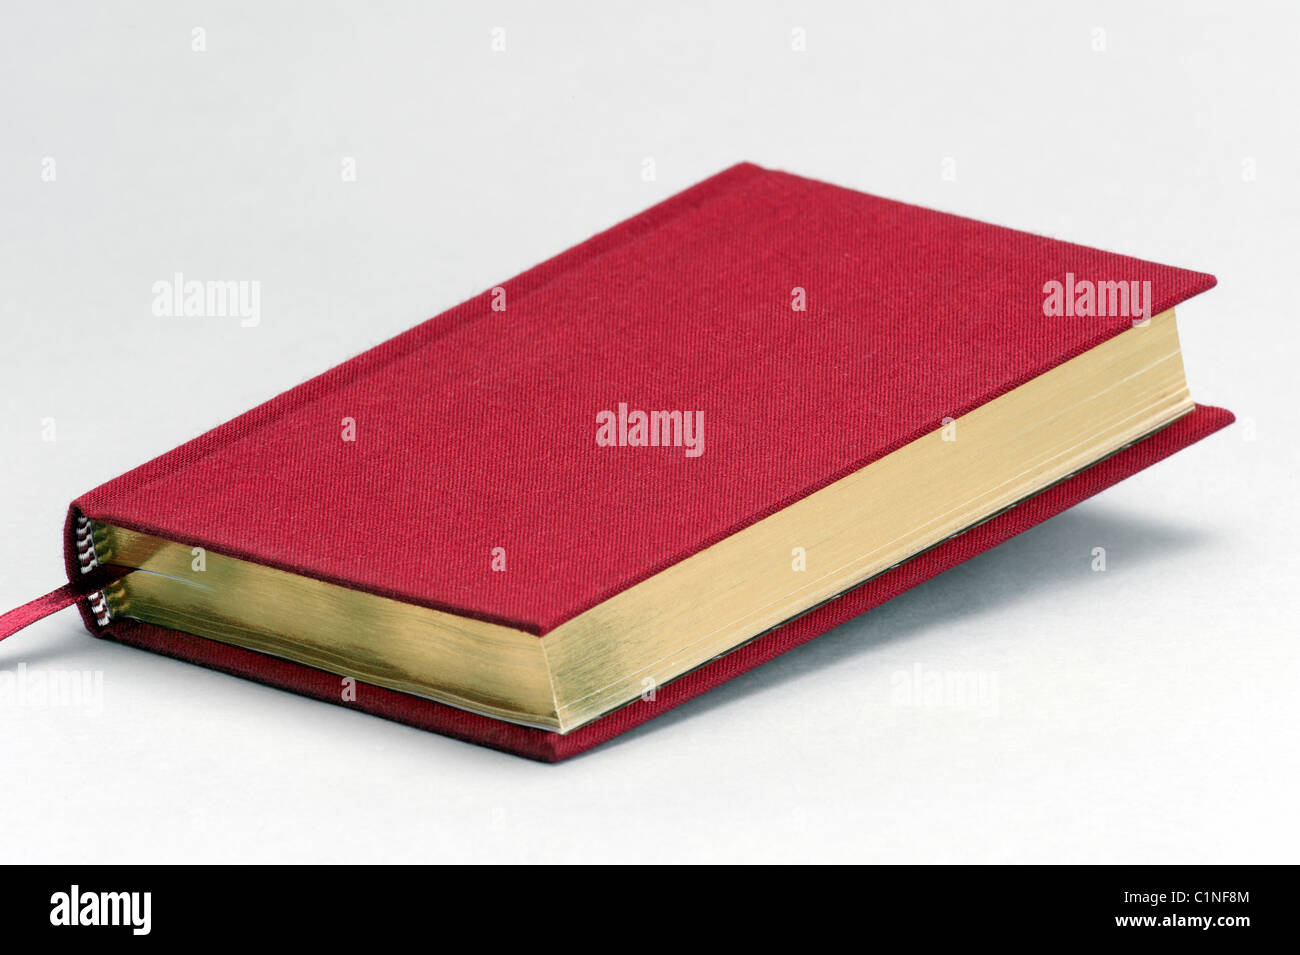 Red plain book with gold pages Stock Photo